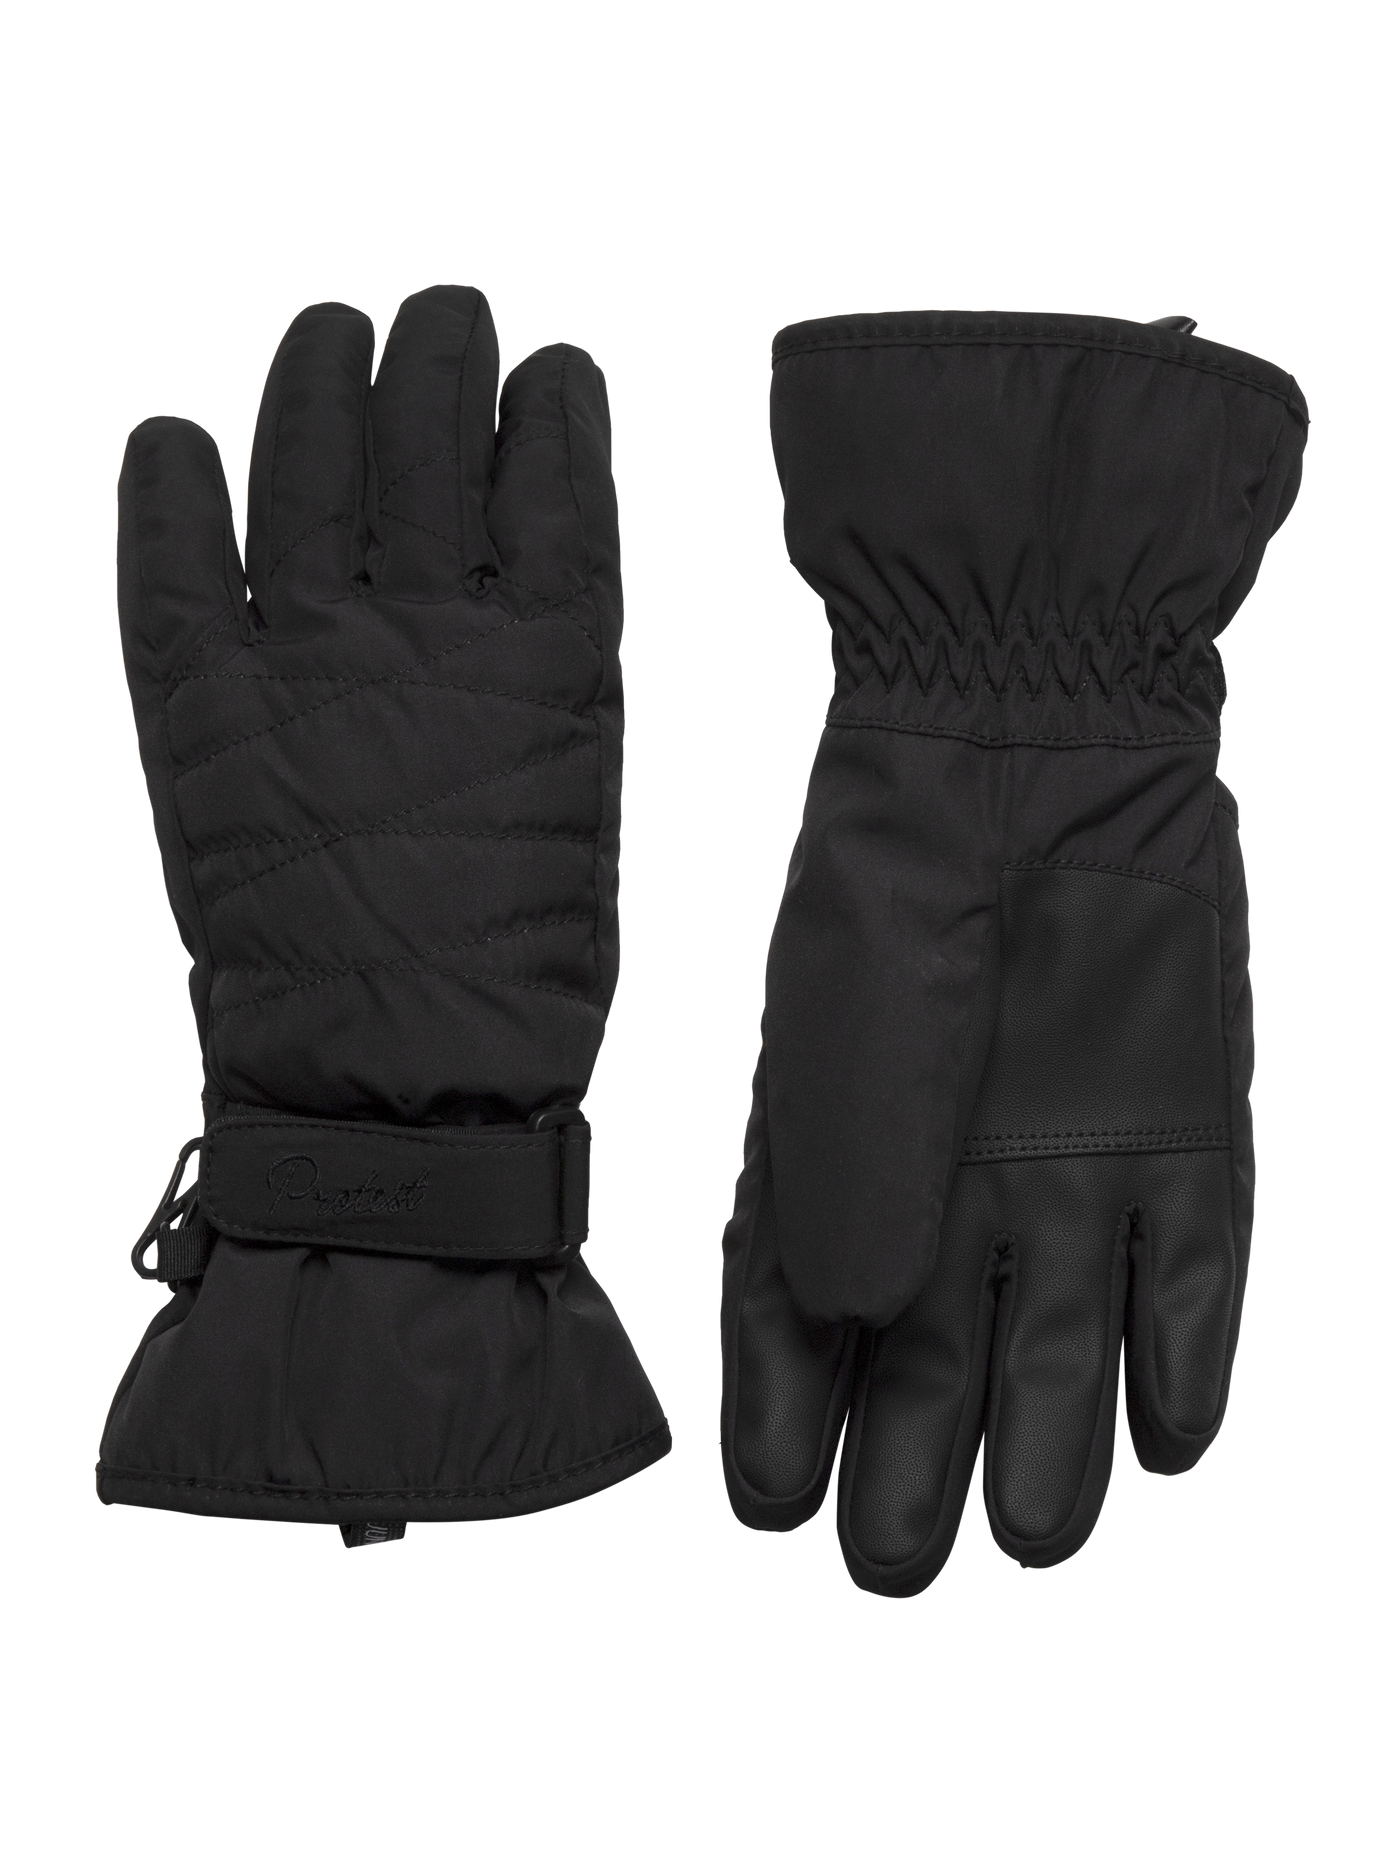 Protest Kids Fingest JR Glove (age 11-14 years)